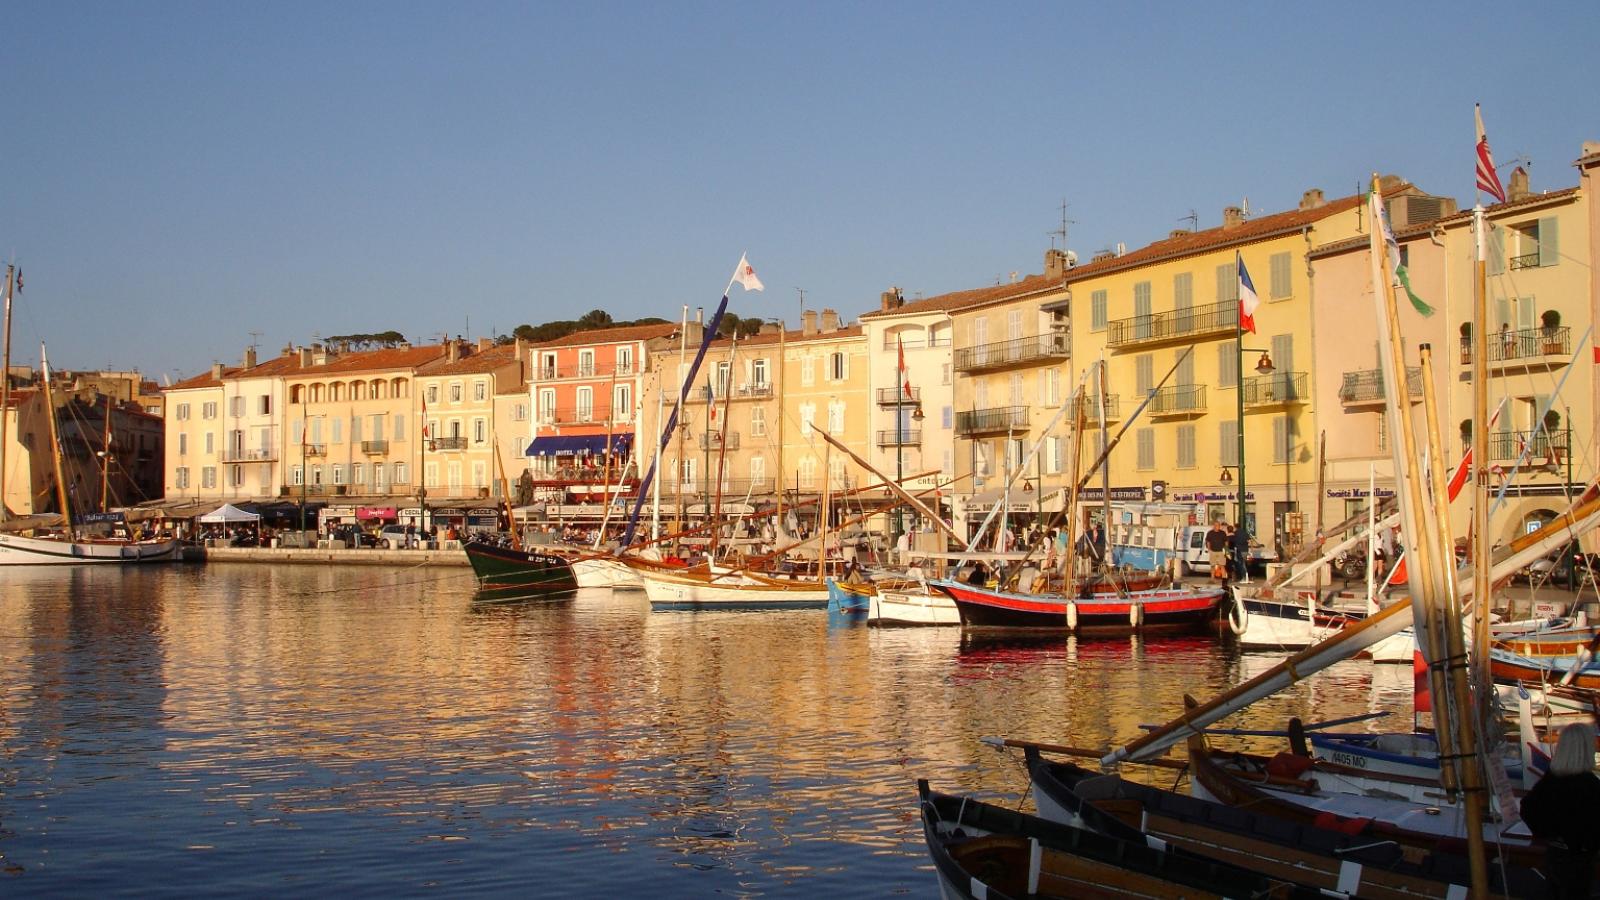 The Old Port Of Saint Tropez Has A Story To Tell Sezz Saint Tropez